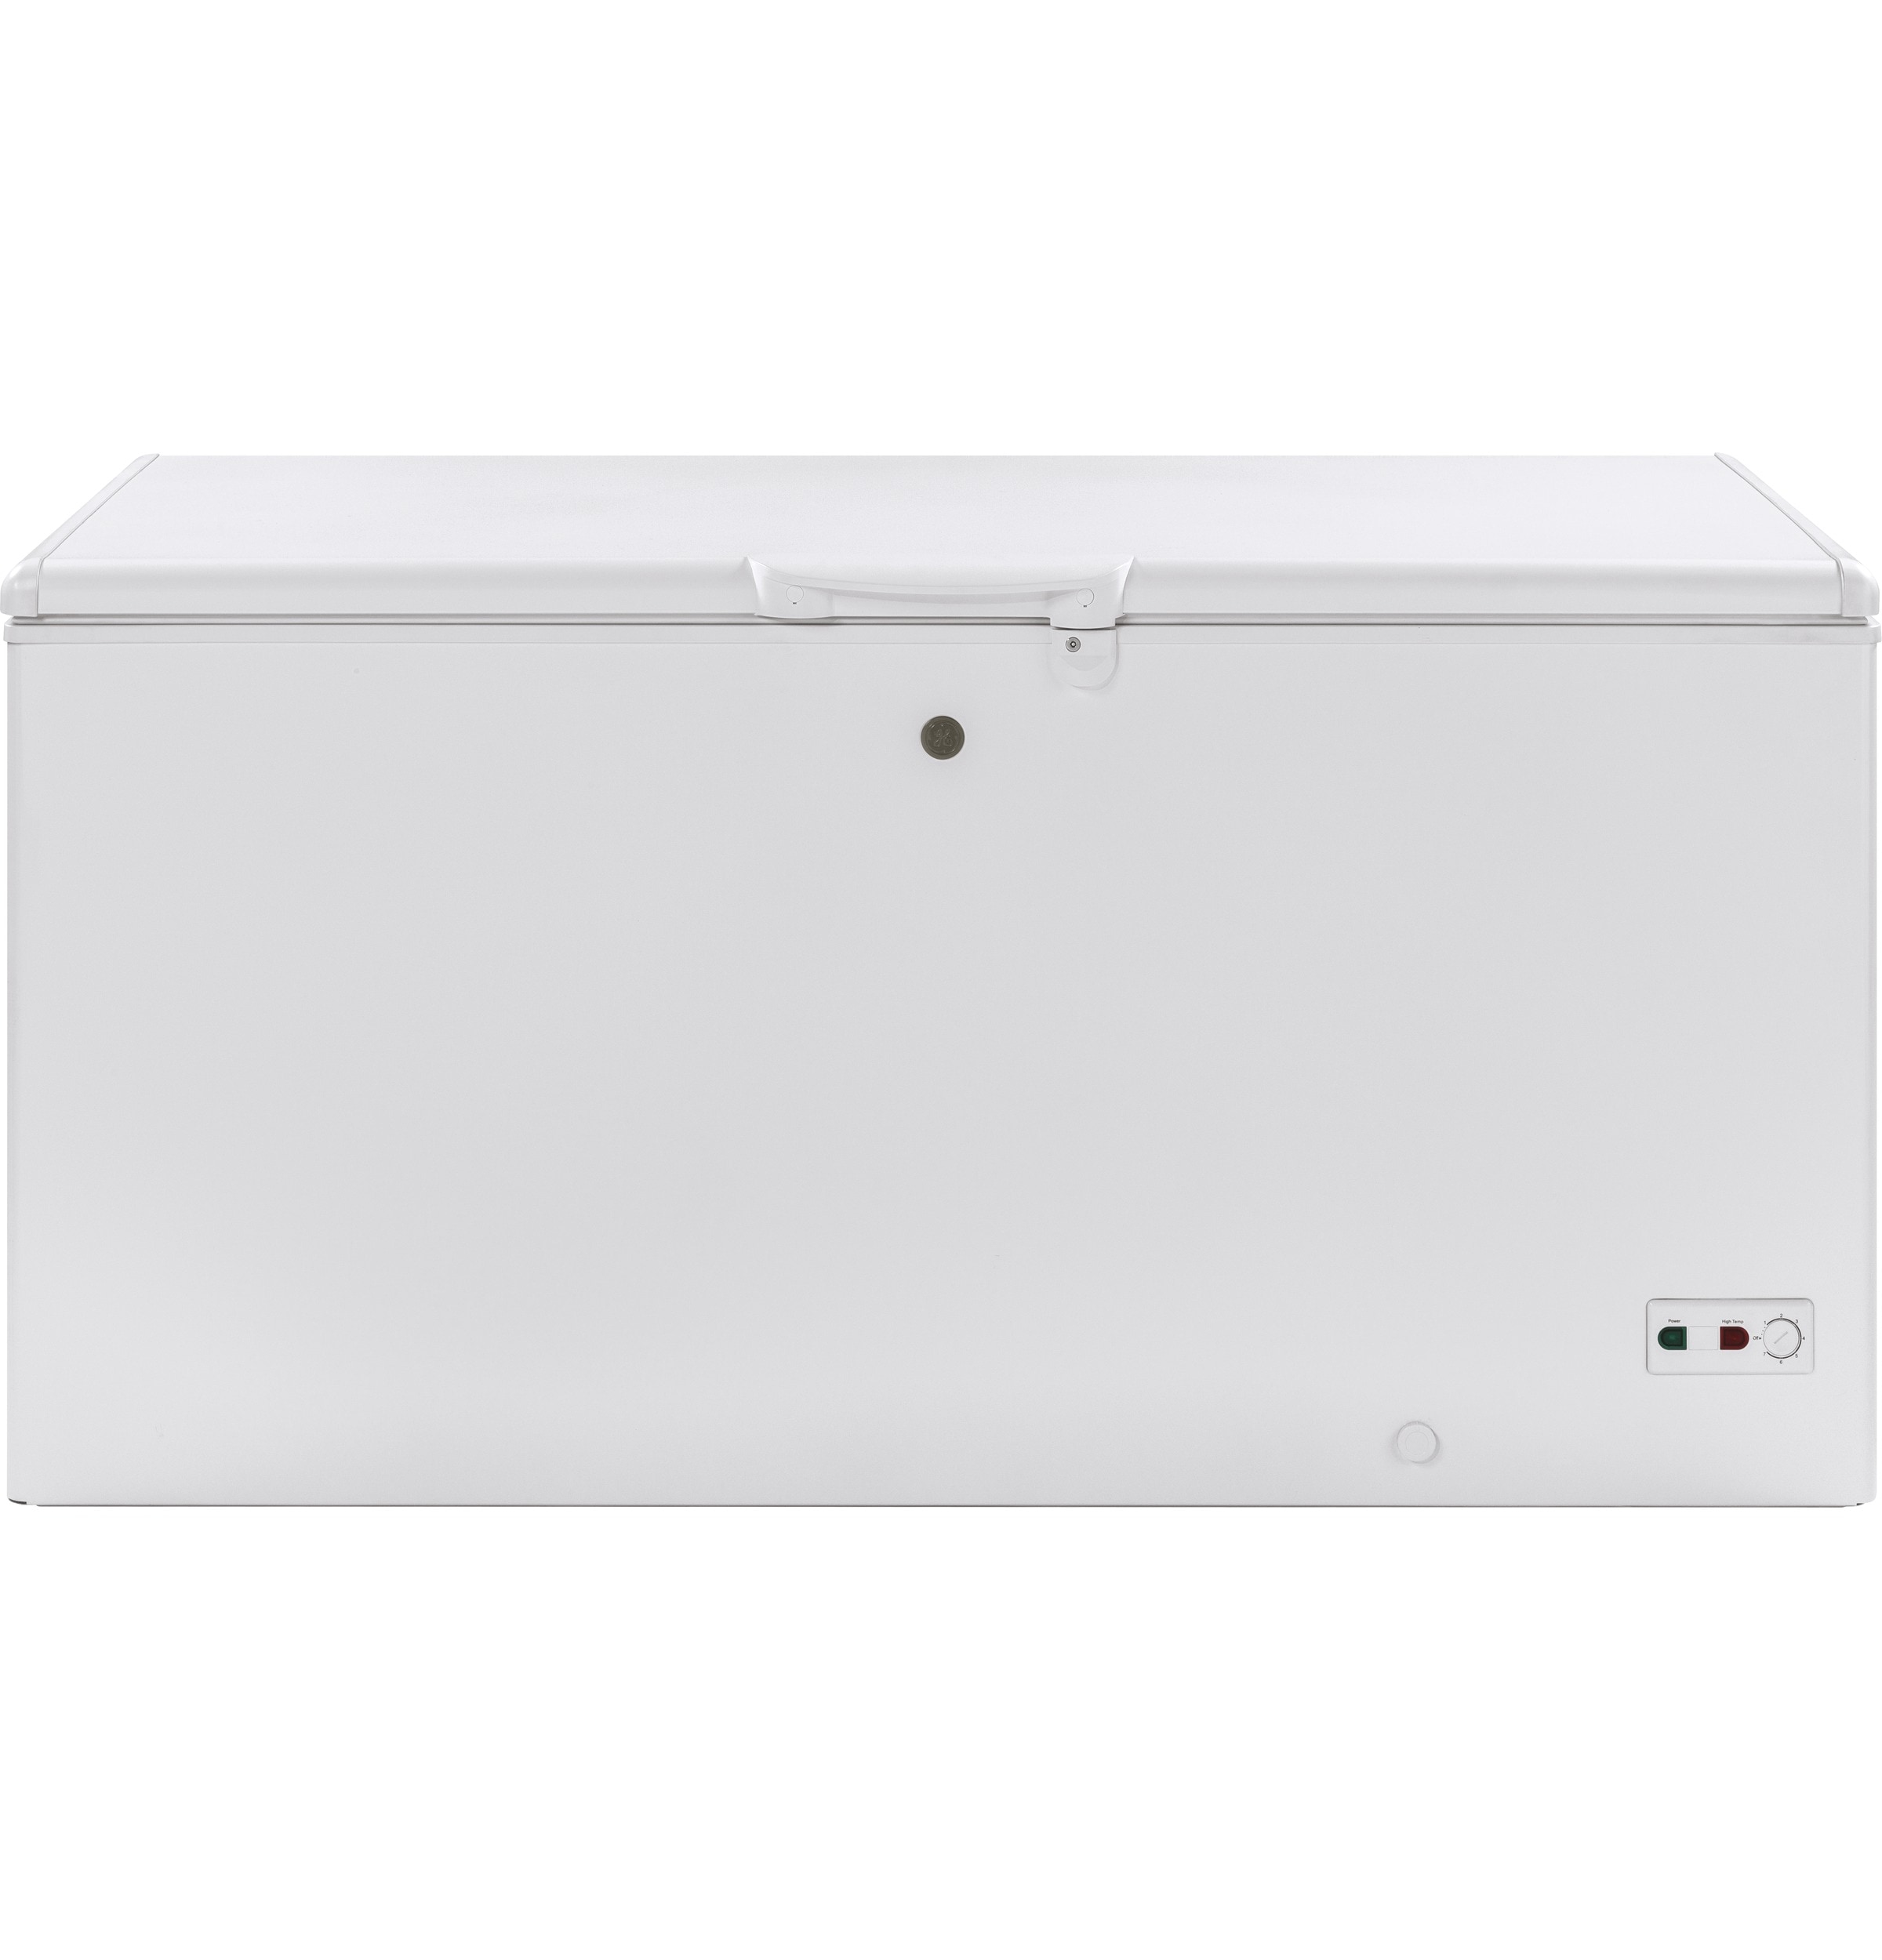 GE Garage Ready 7 Cubic Foot Chest Freezer Review